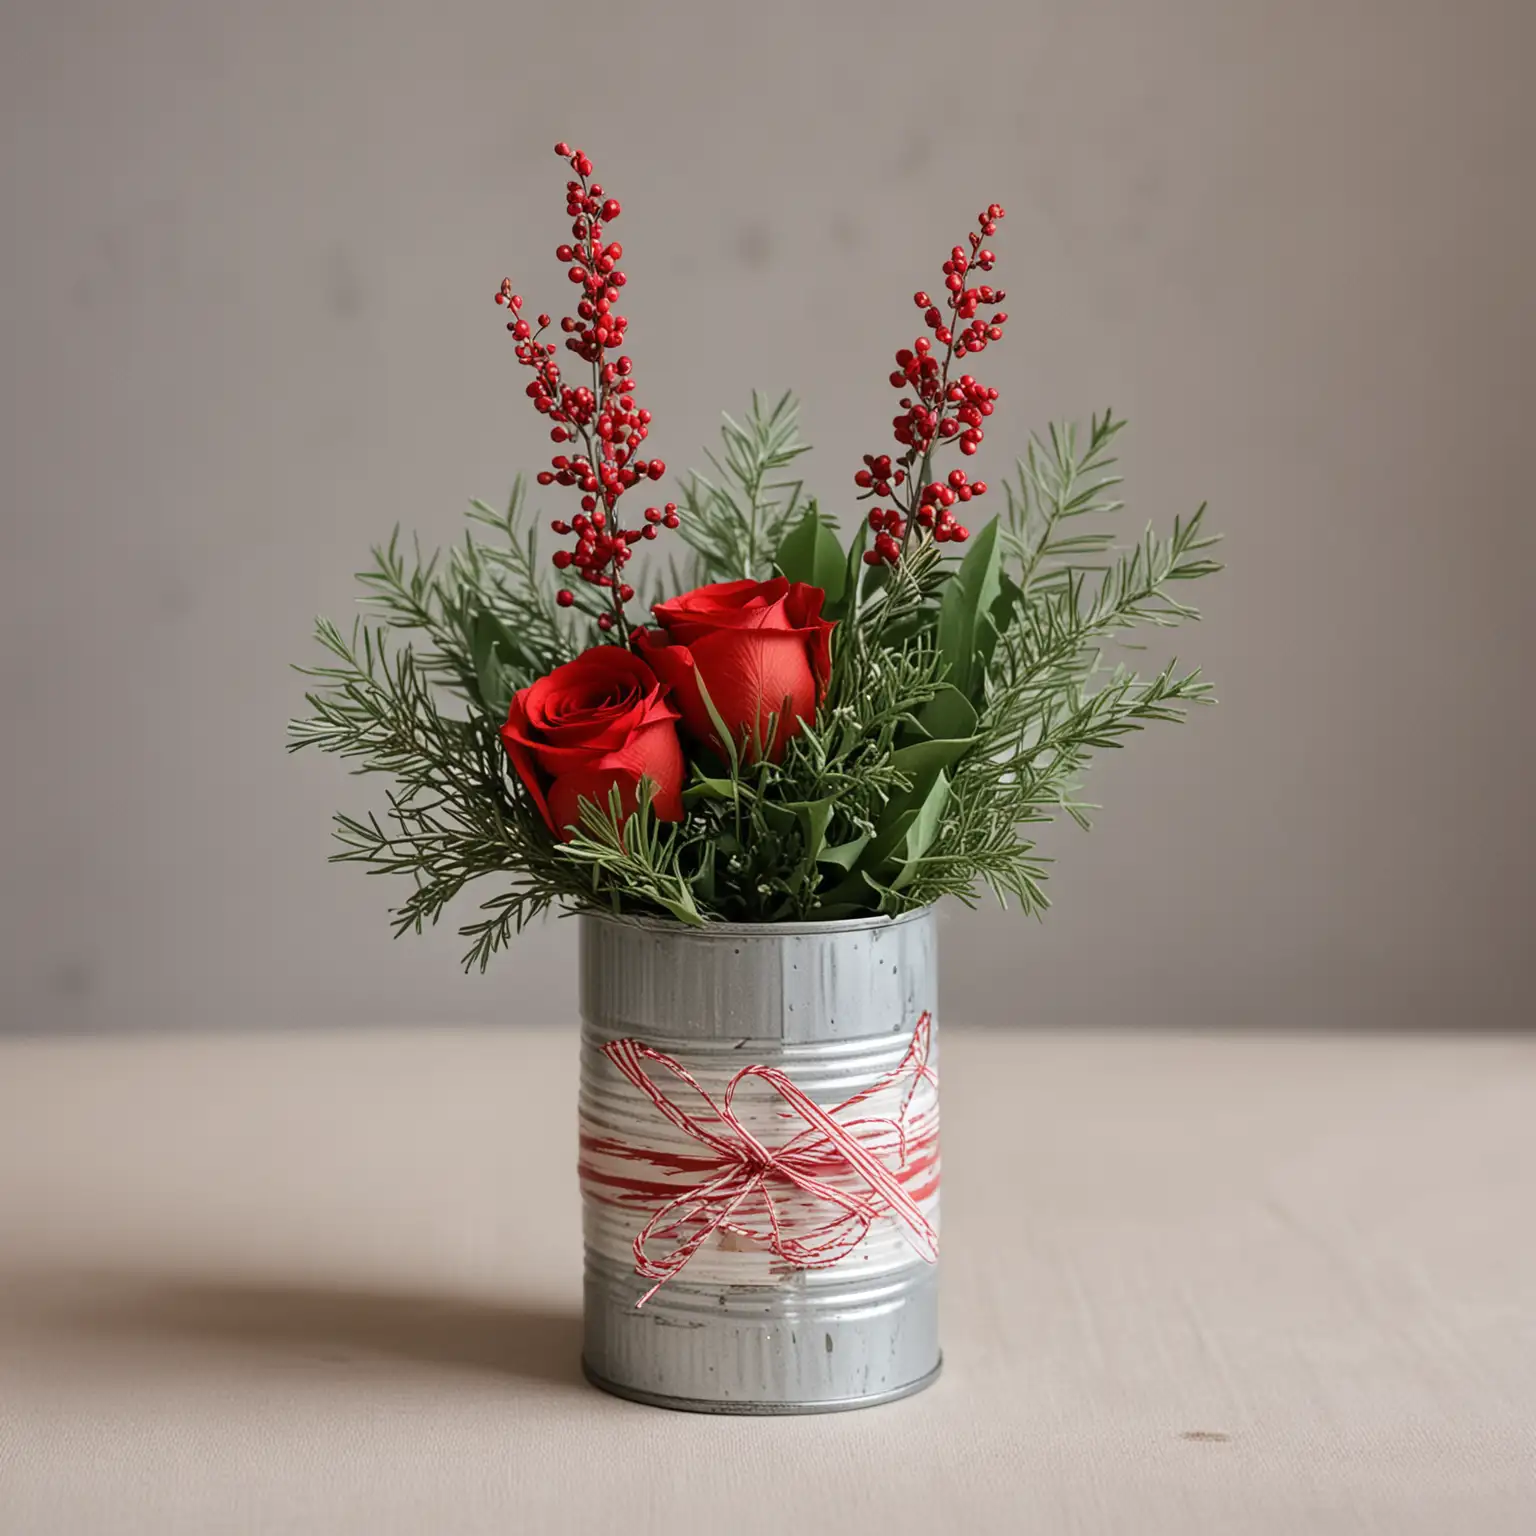 Modern-Geometric-Winter-Wedding-Centerpiece-with-Red-and-Green-Stripes